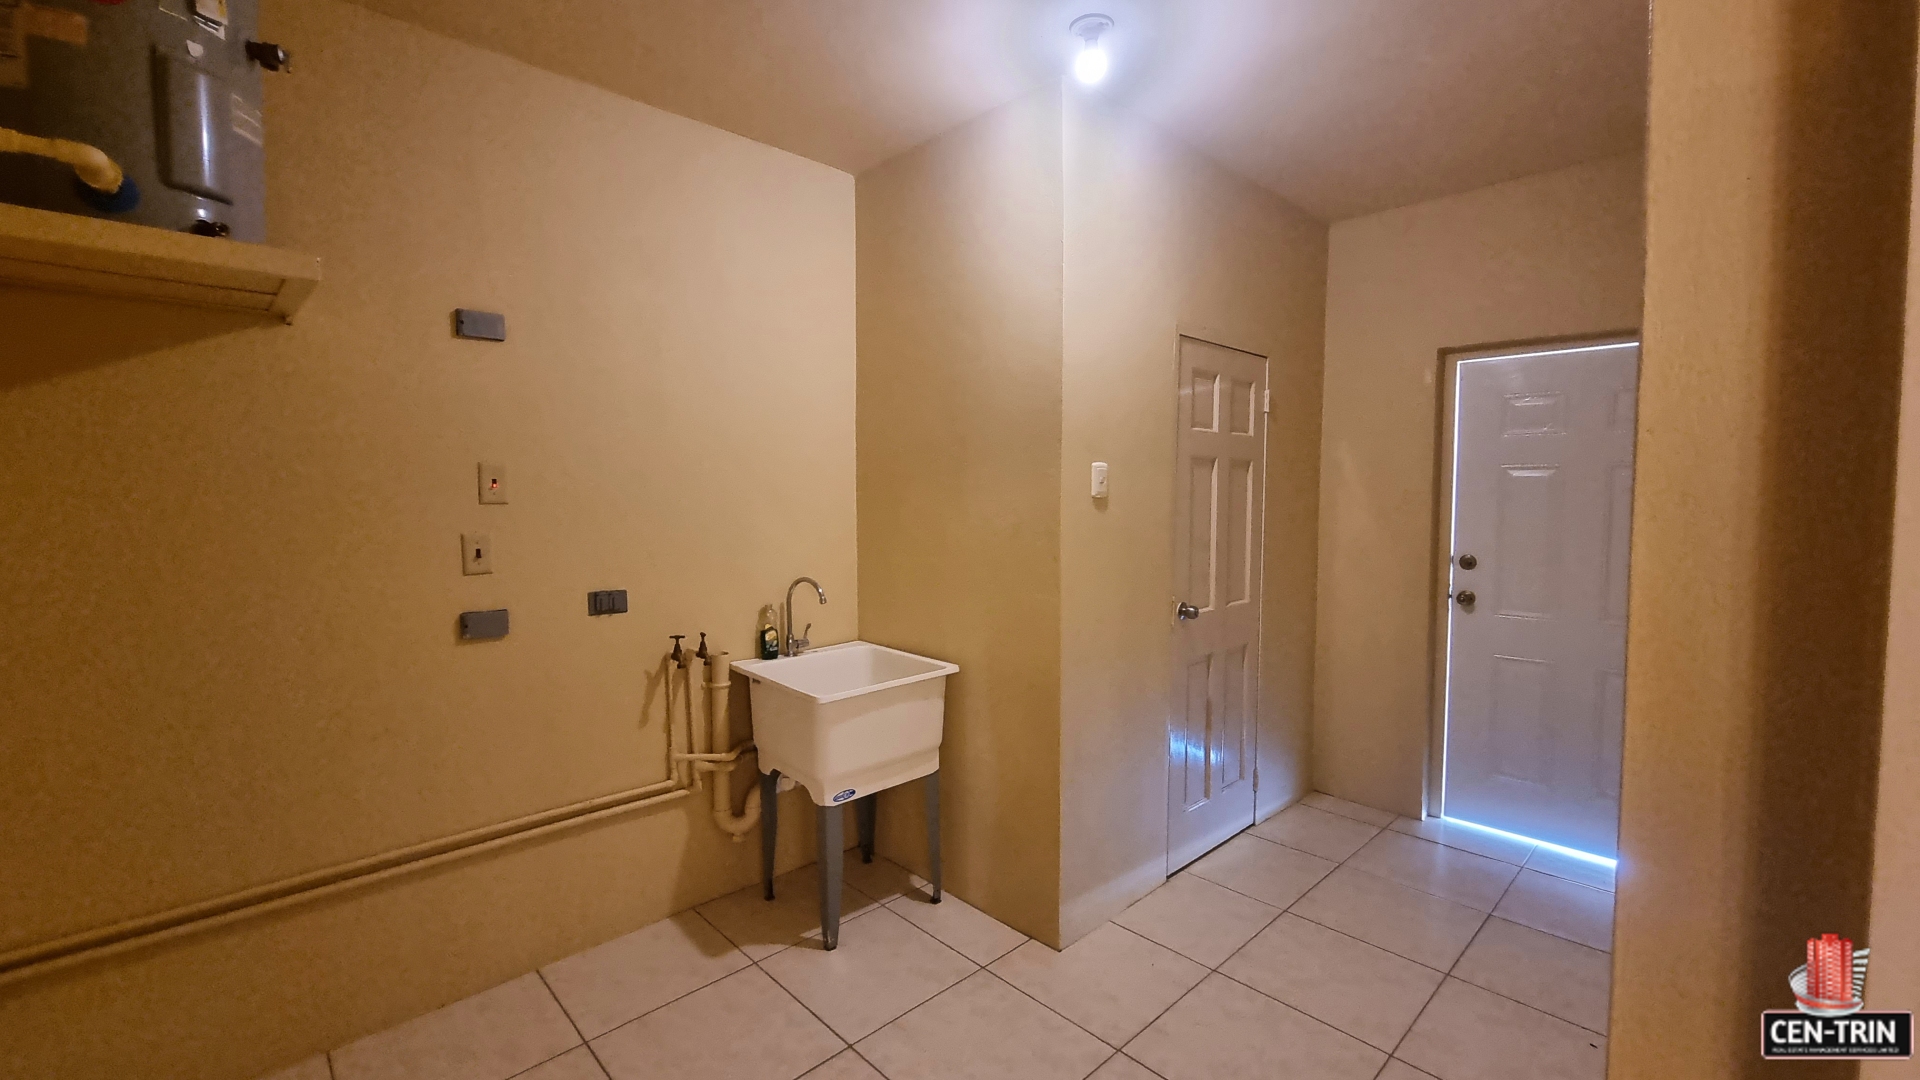 Laundry room in townhouse for sale with sink, faucet, cabinets, and washer and dryer.